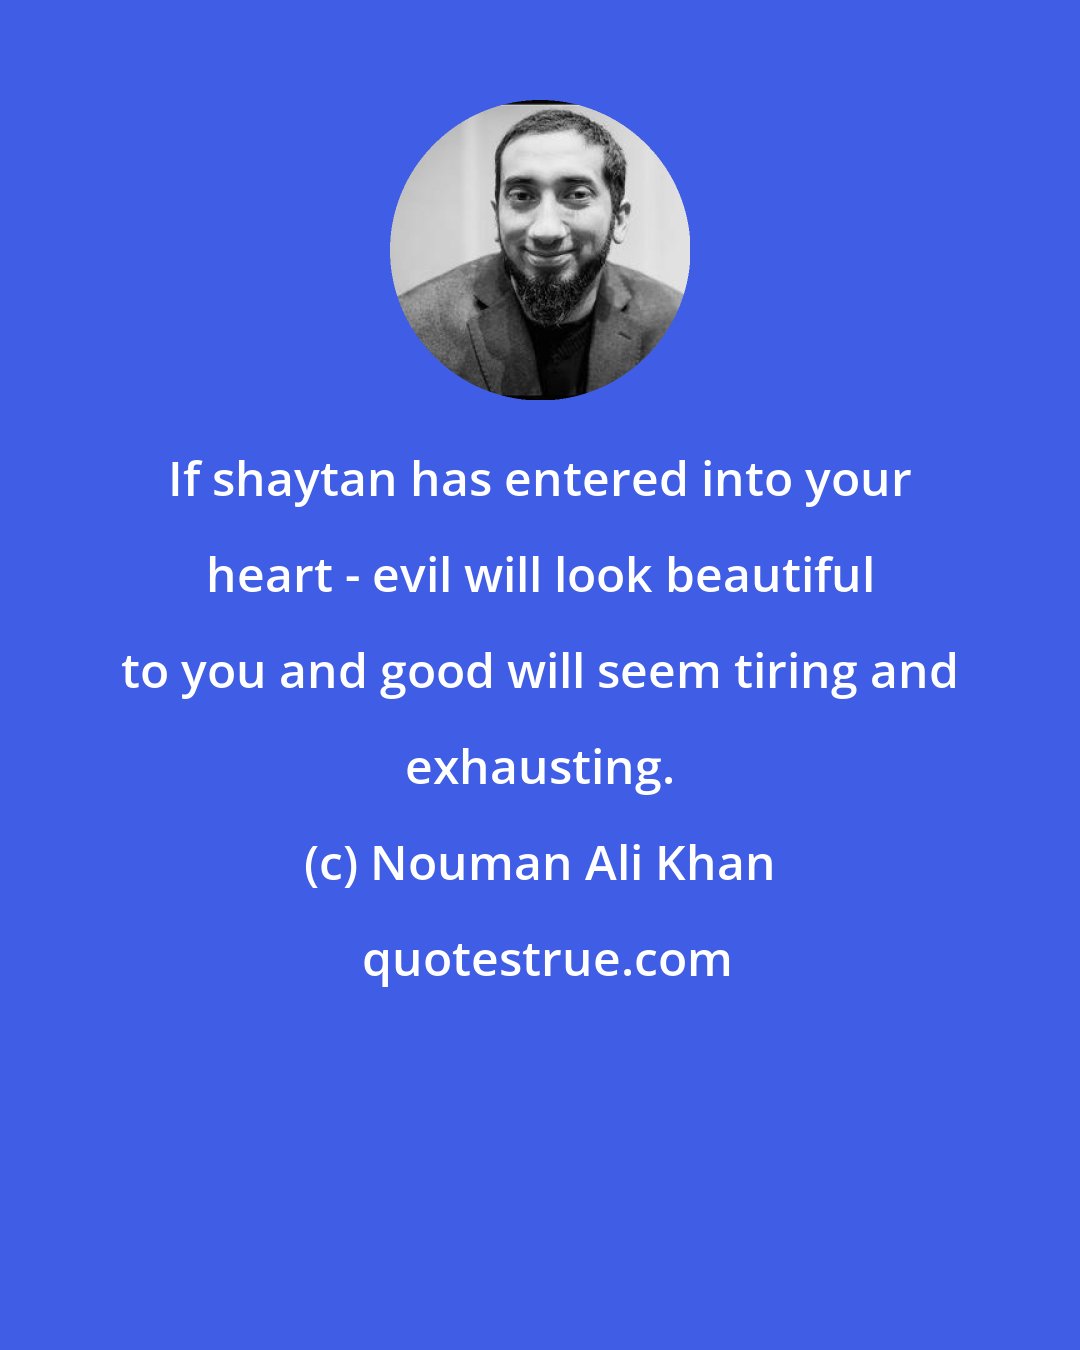 Nouman Ali Khan: If shaytan has entered into your heart - evil will look beautiful to you and good will seem tiring and exhausting.